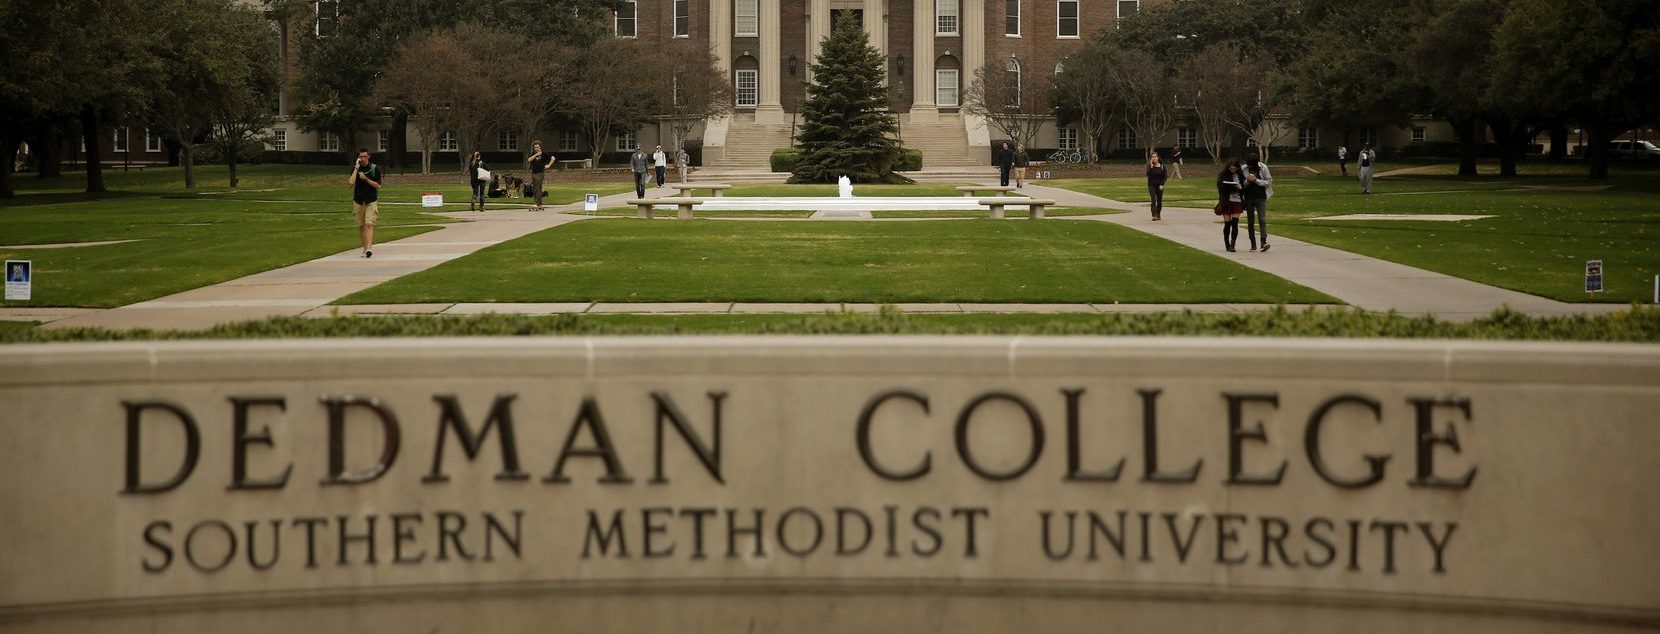 The name of Southern Methodist University's Dedman College juts out in bold, black serif letters from a beige stone sign spanning the lower third of the shot. Above it, in the near distance, stands the marble columns, red brick walls and copper-green dome of Dallas Hall, distanced by concrete walkways cutting across a neatly trimmed campus quad